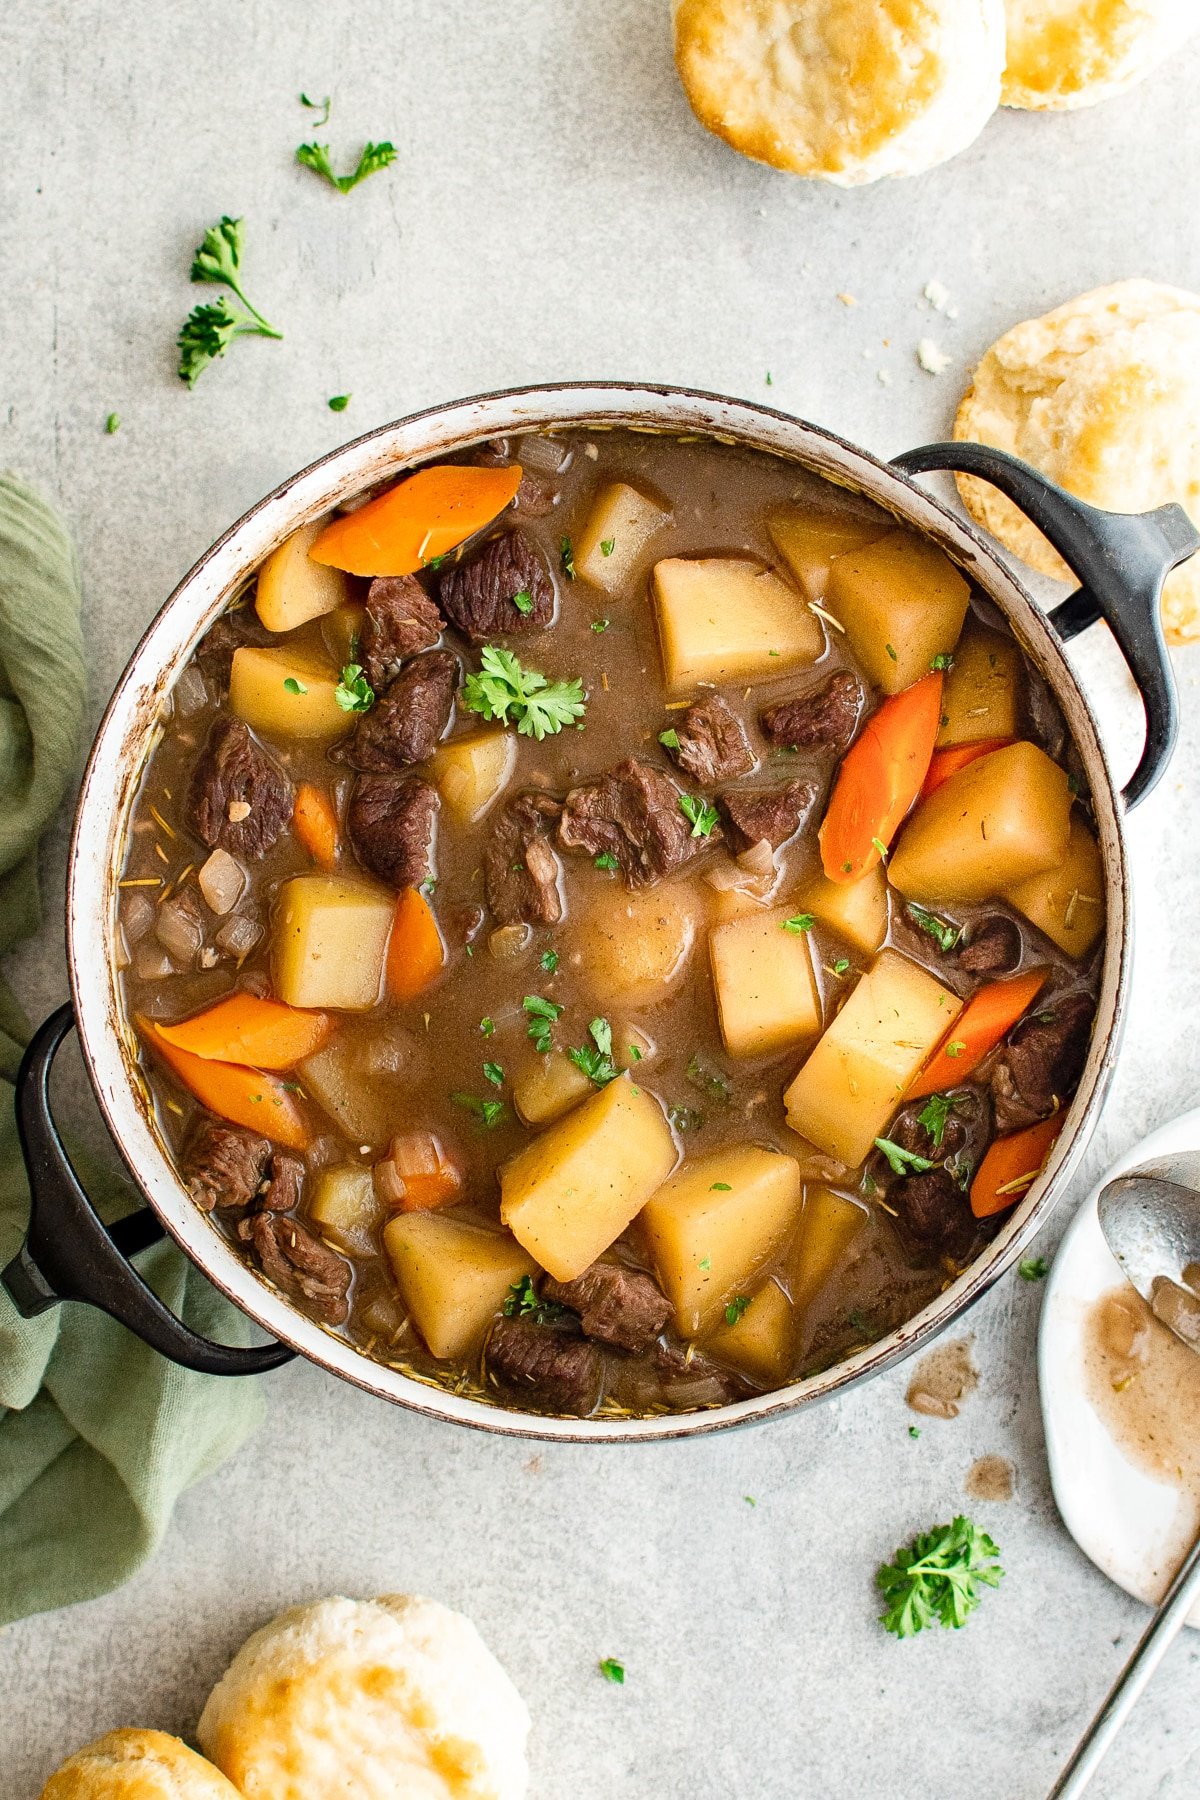 Large pot filled with simmering beef stew made with beef, potatoes, carrots, onions, in a red wine broth and garnished with fresh parsley.